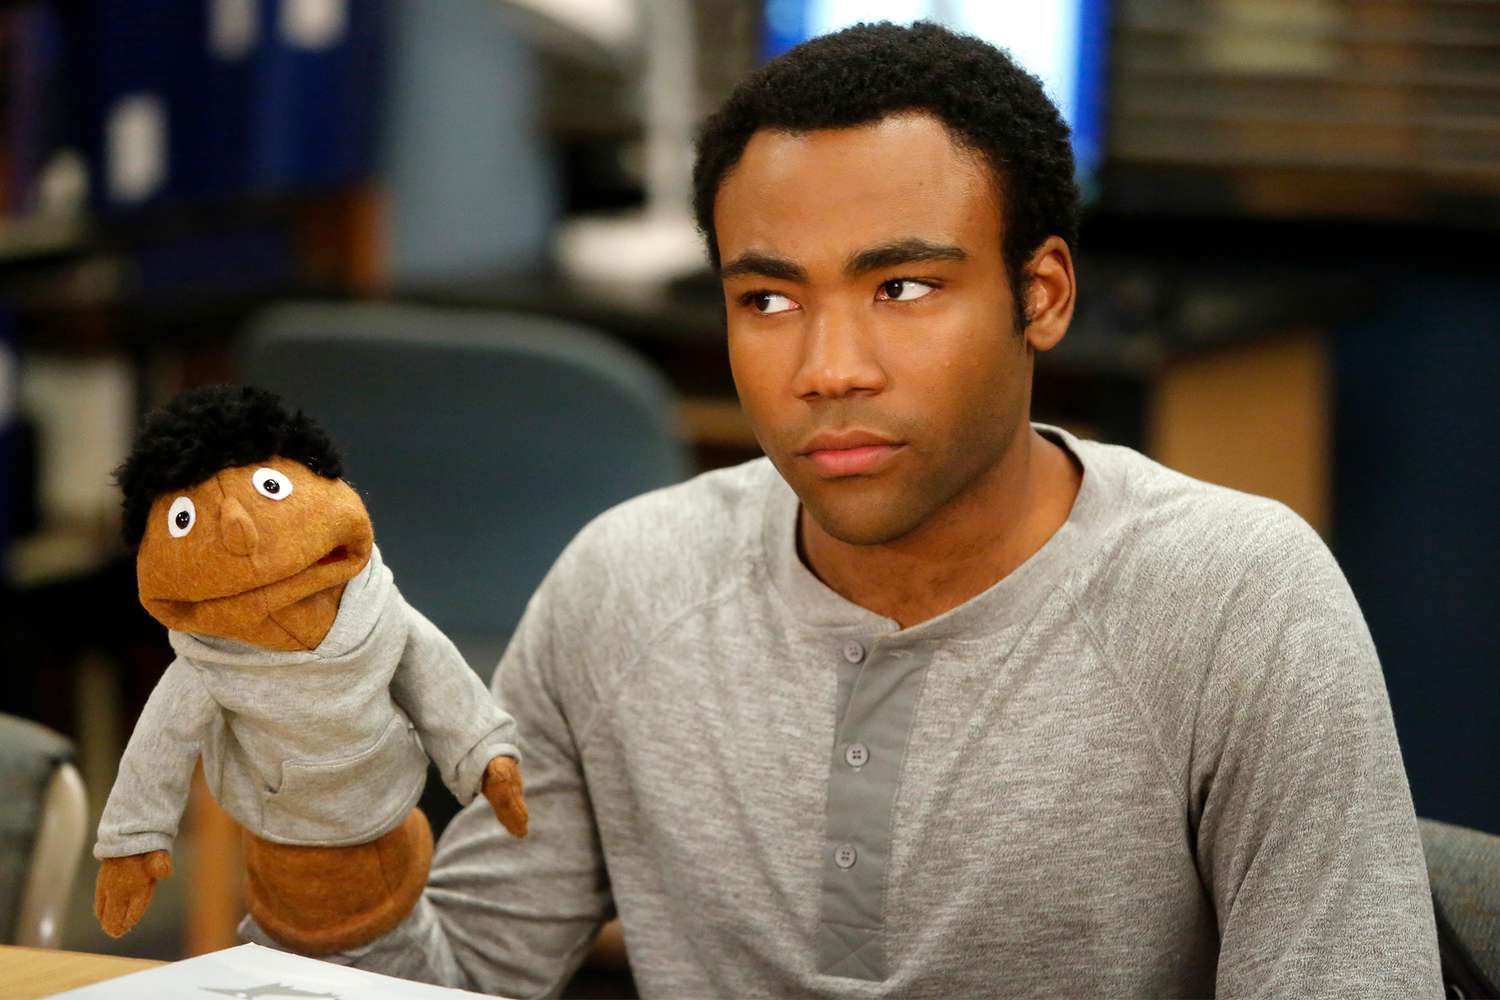 Donald Glover denies his schedule is delaying 'Community' movie: 'I swear it's happening'